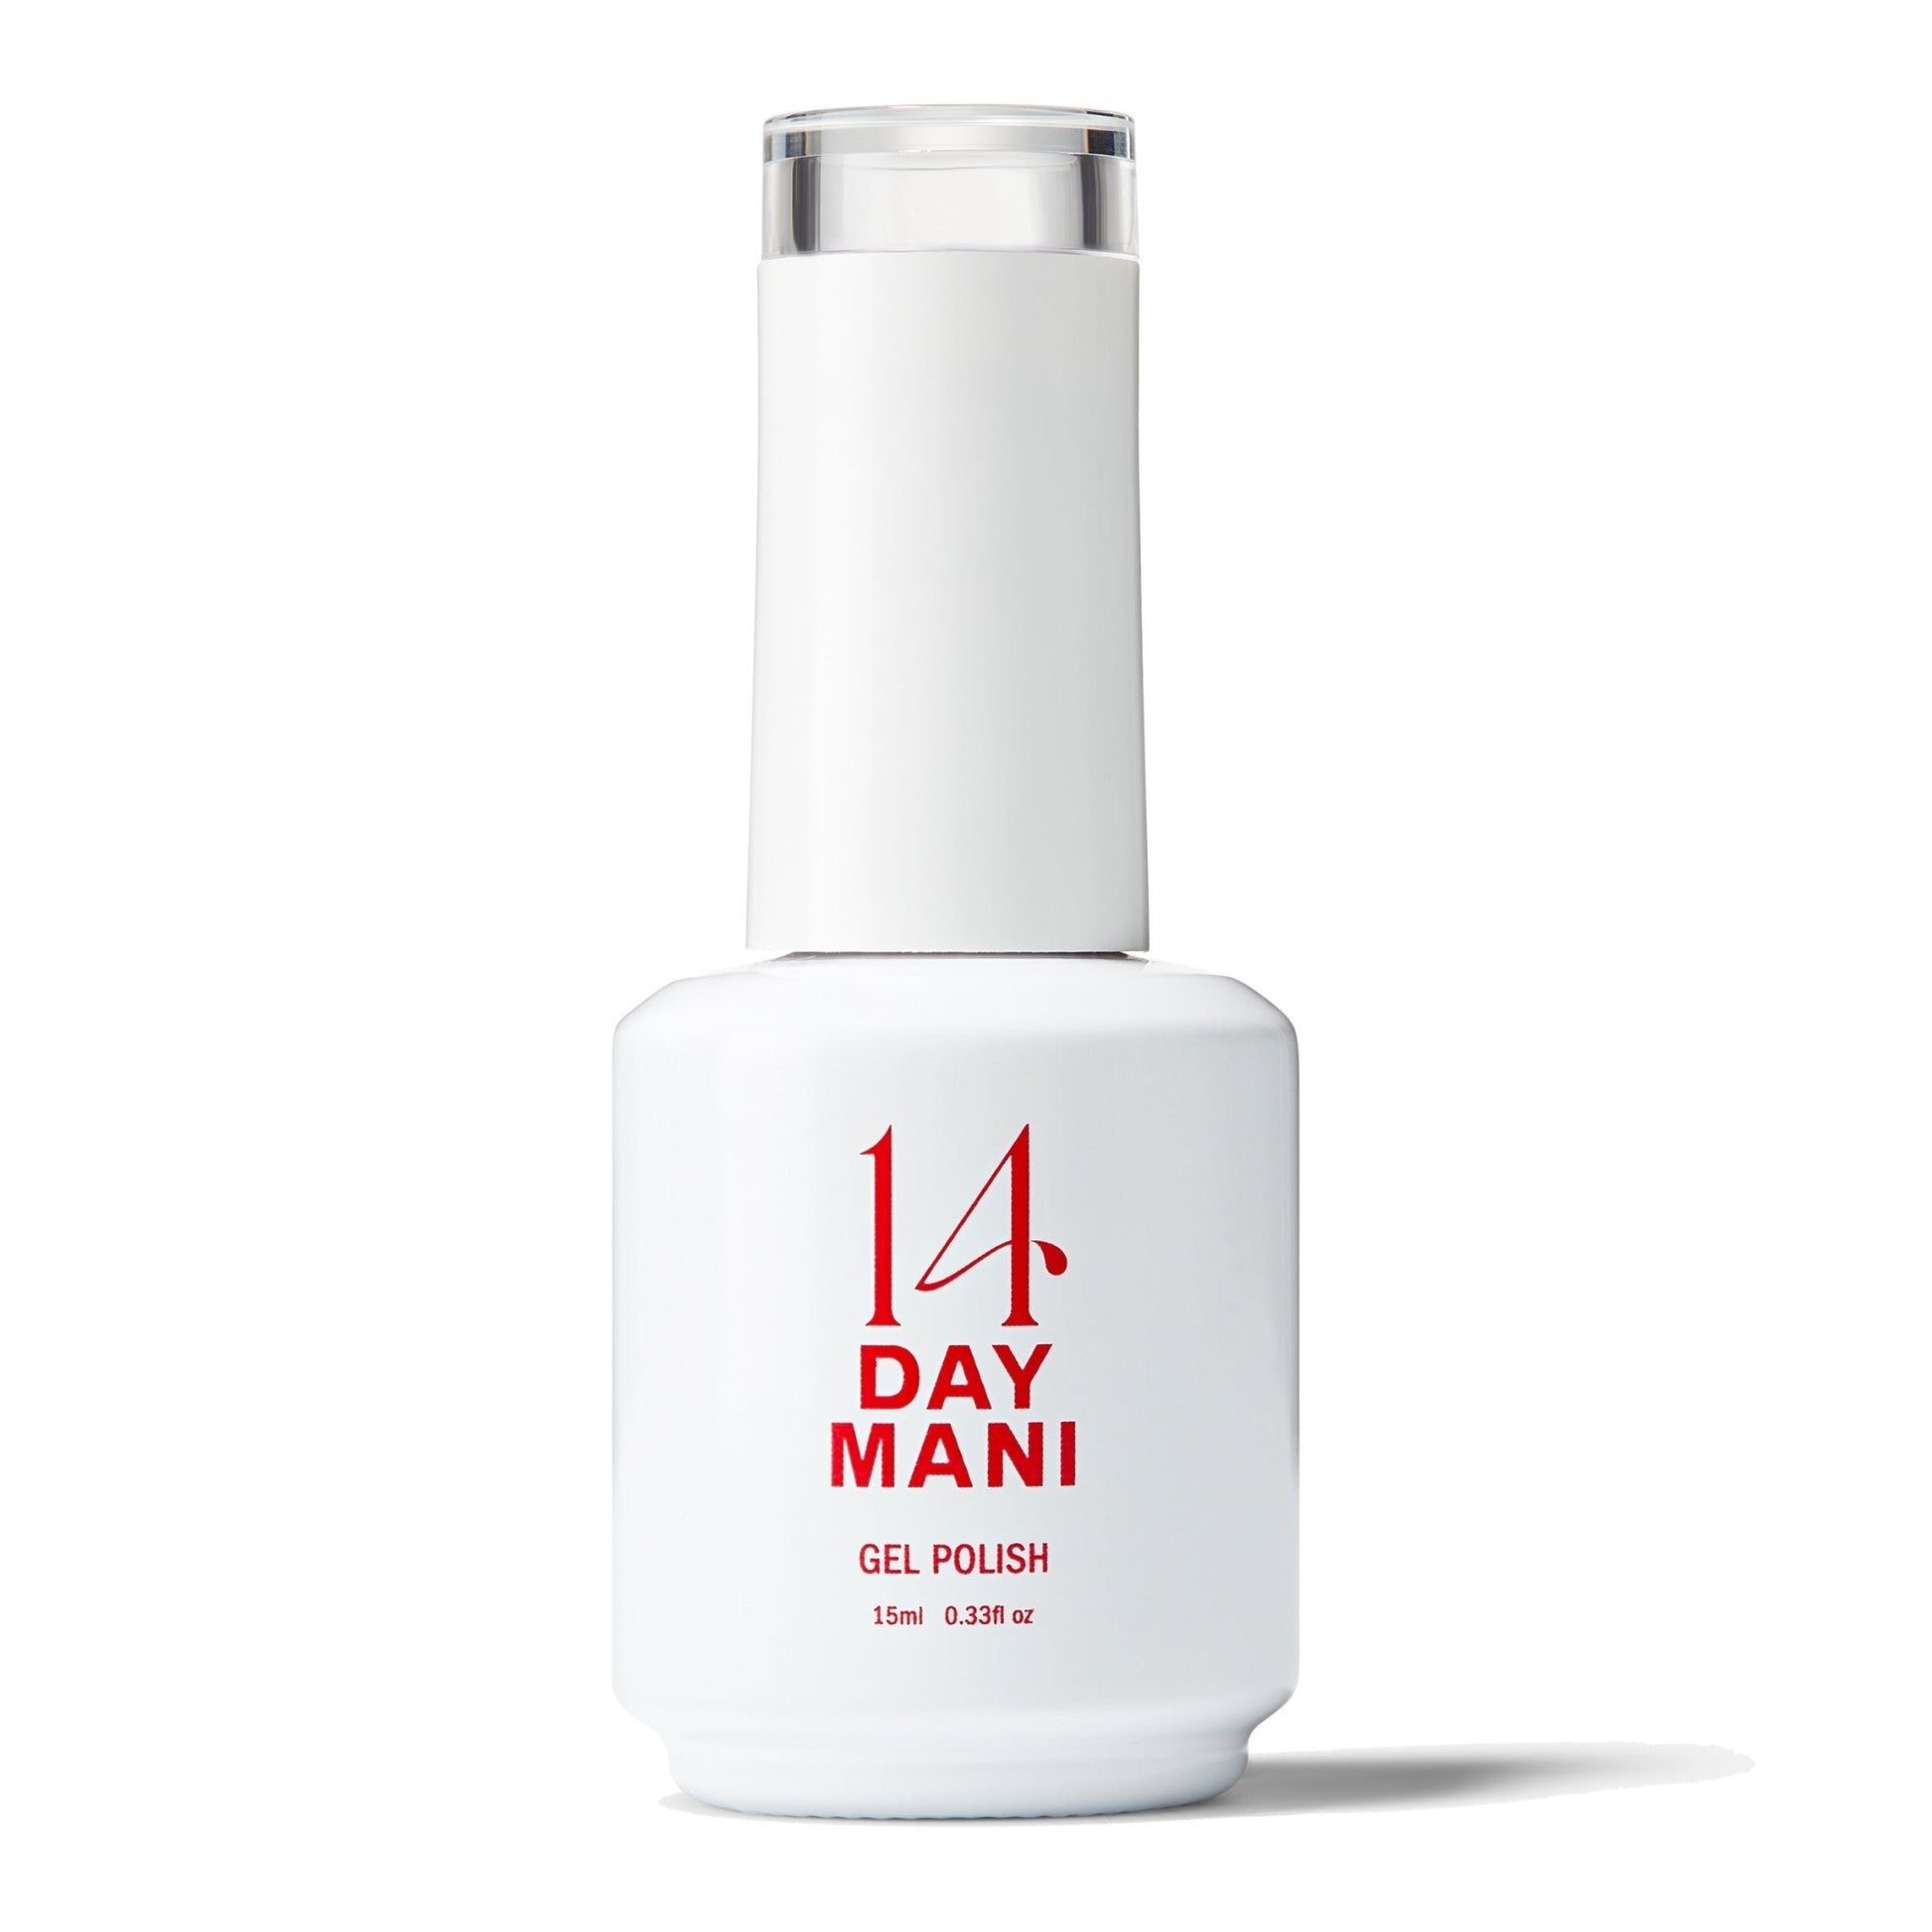 It's all about the Glam - Gel Polish - 14 Day Manicure - Bottle 